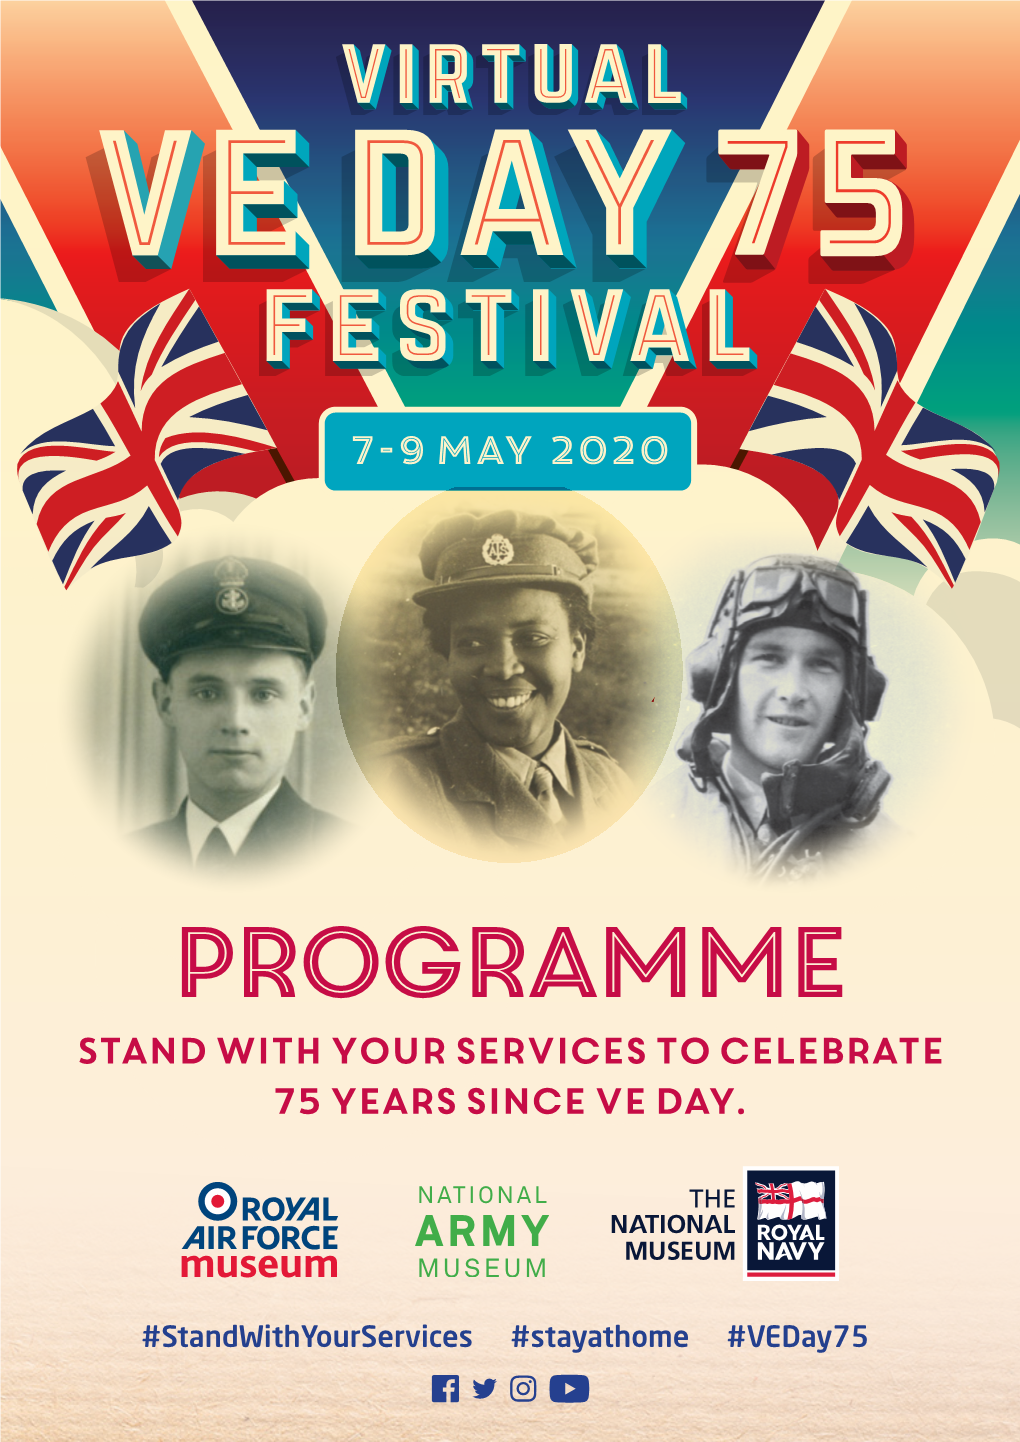 Programme Stand with Your Services to Celebrate 75 Years Since VE Day